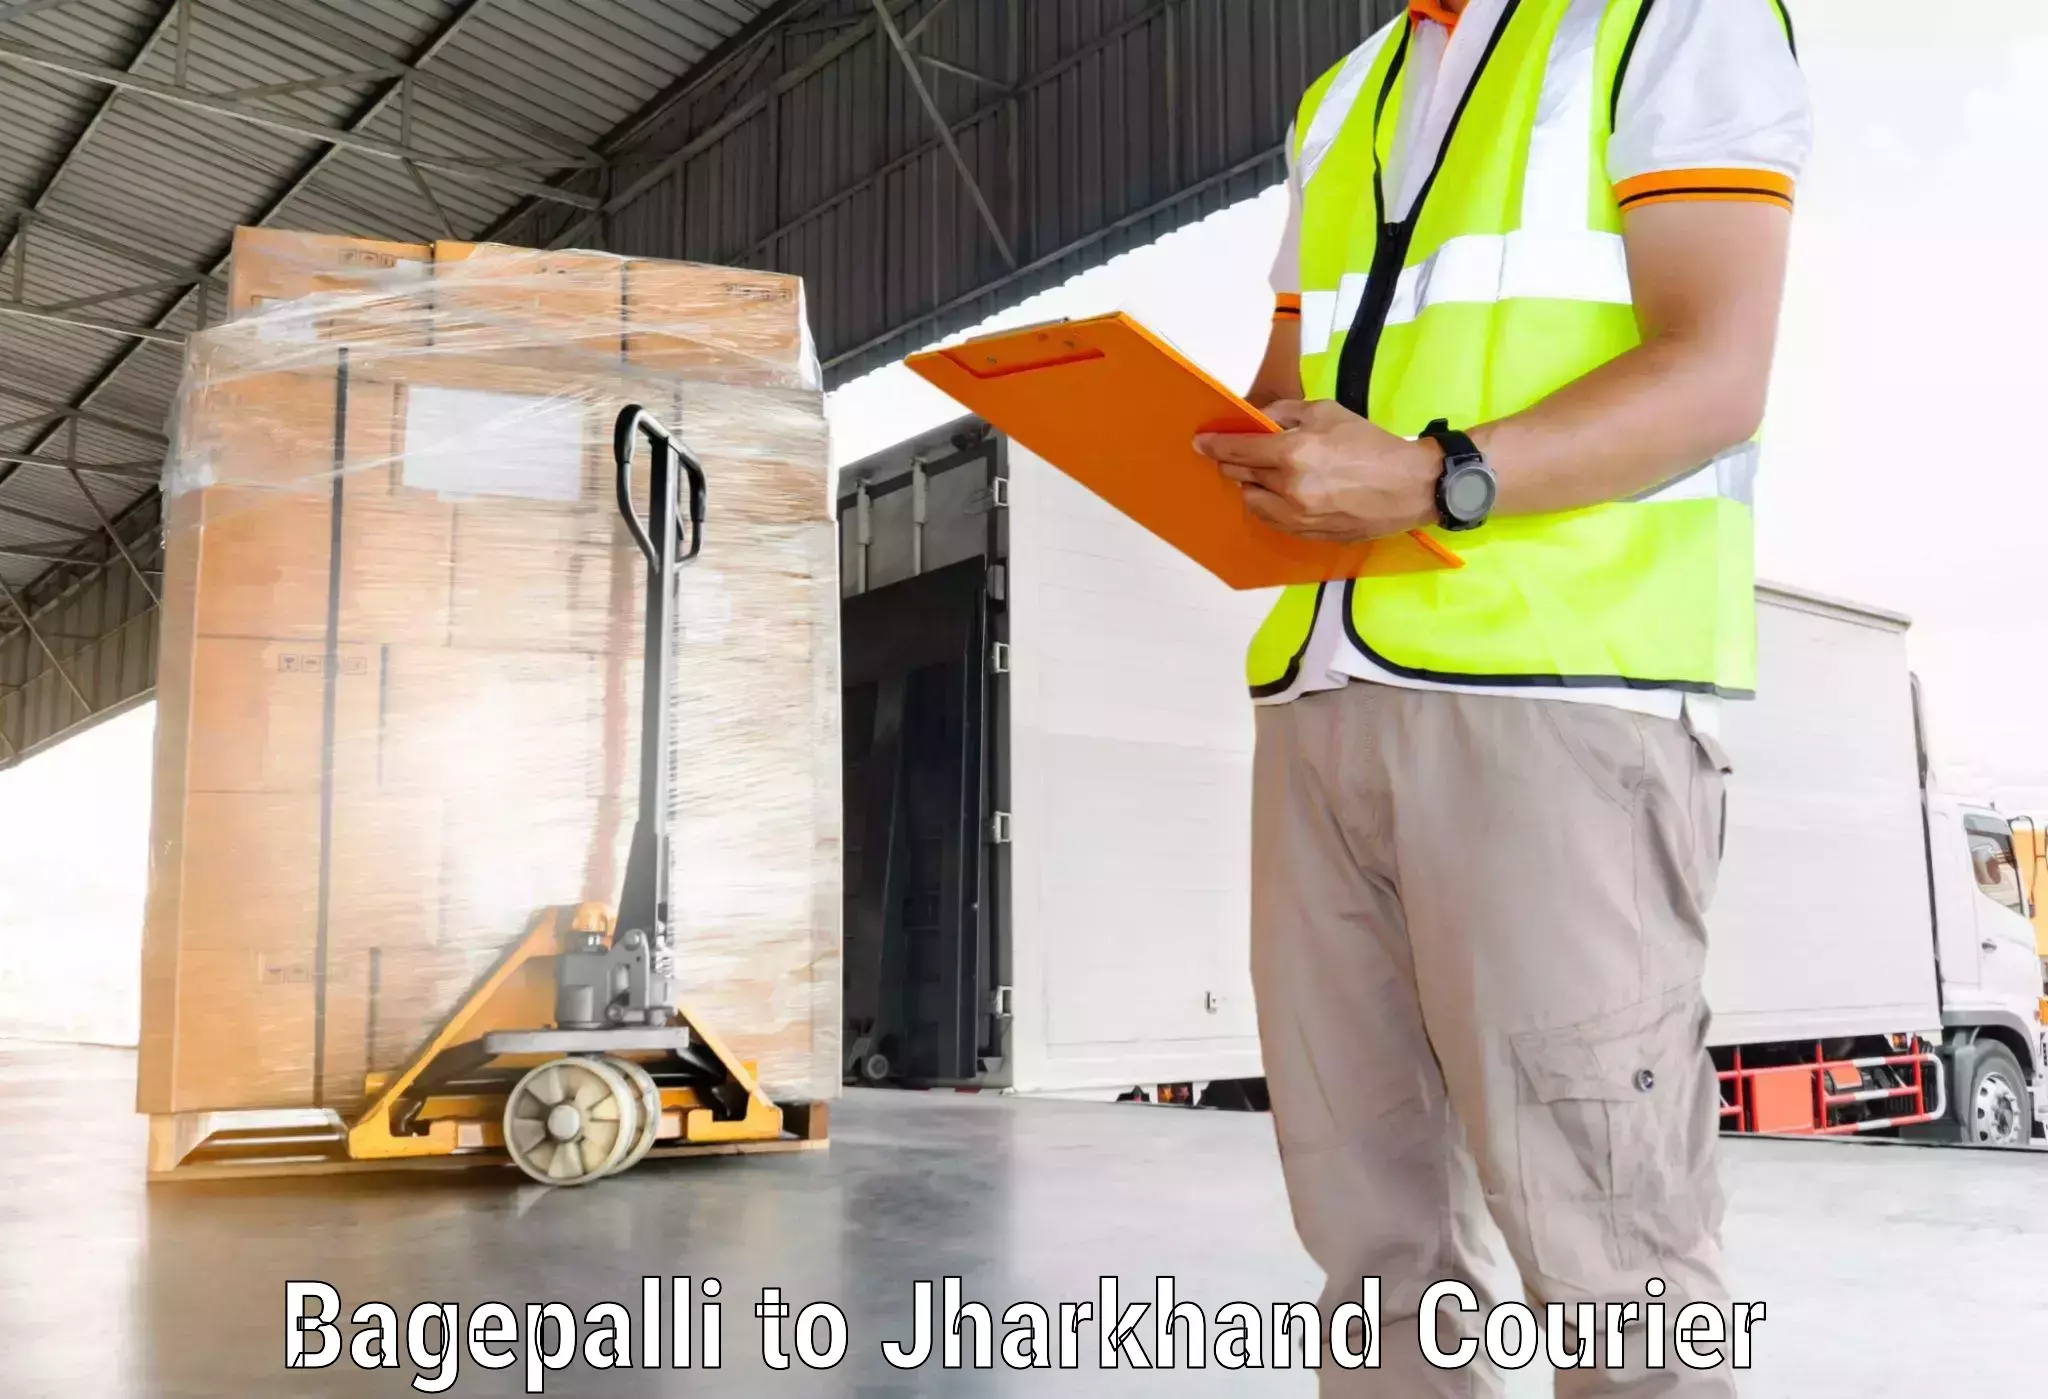 Easy access courier services Bagepalli to Koderma